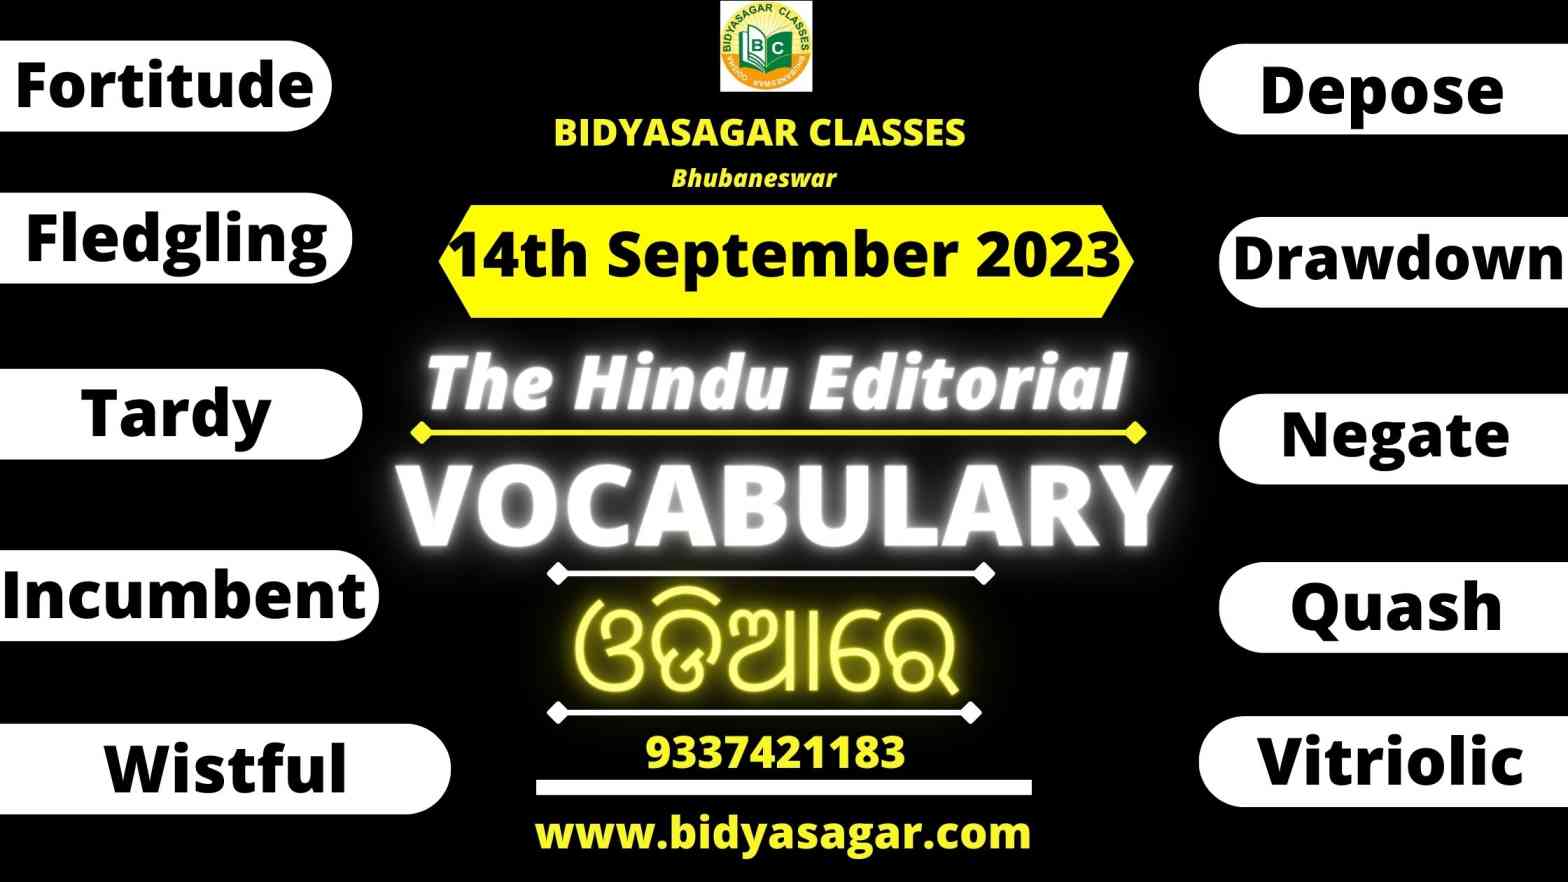 The Hindu Editorial Vocabulary of 14th September 2023